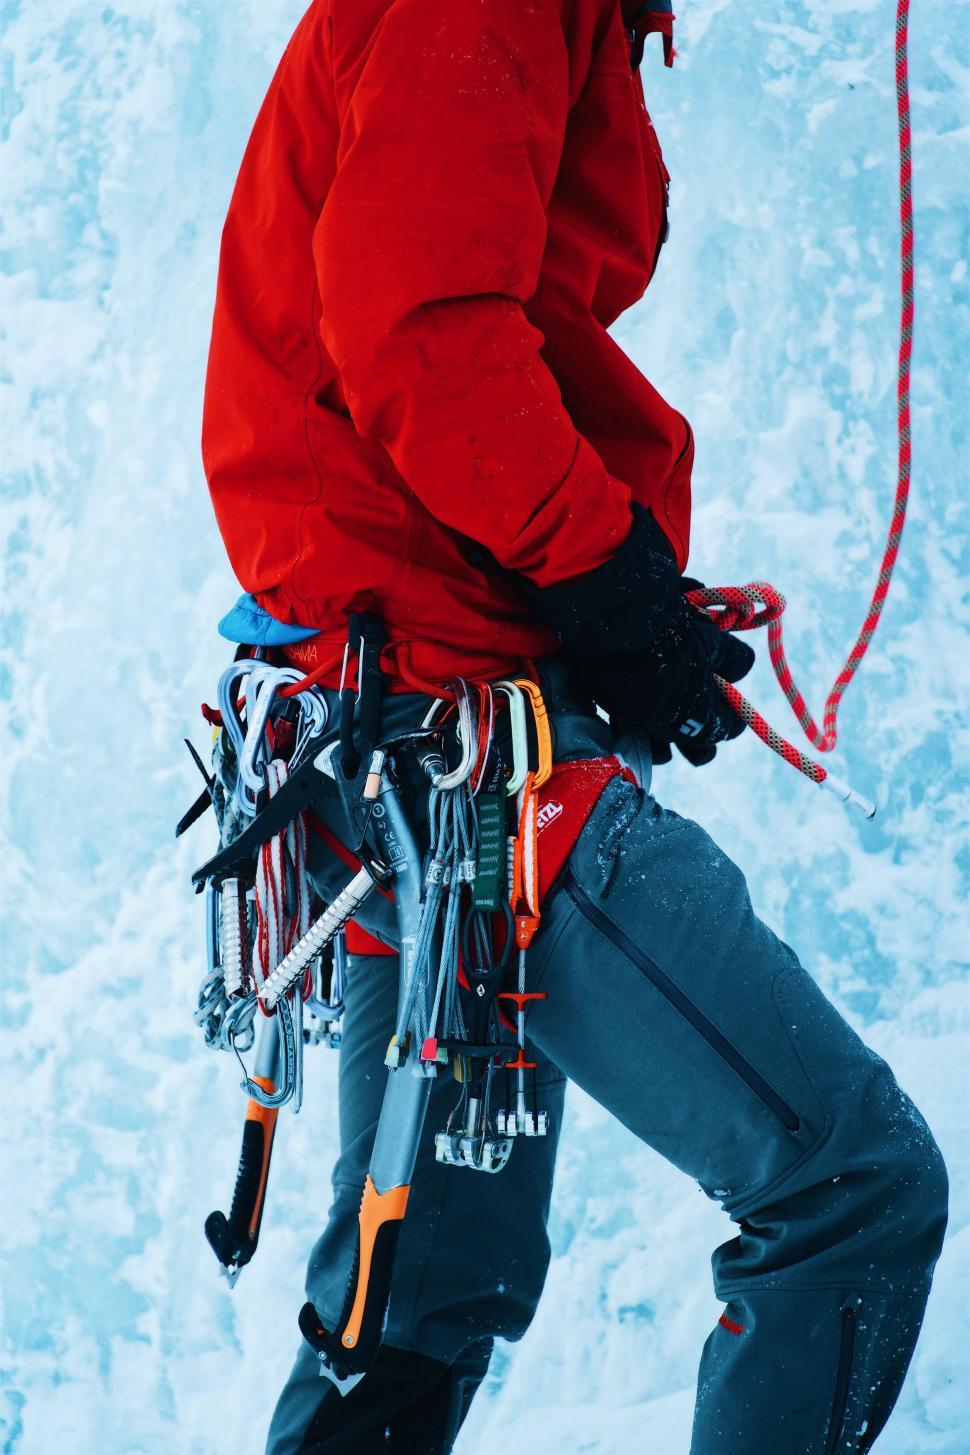 Free Image of Man in Red Jacket Holding Pair of Skis 